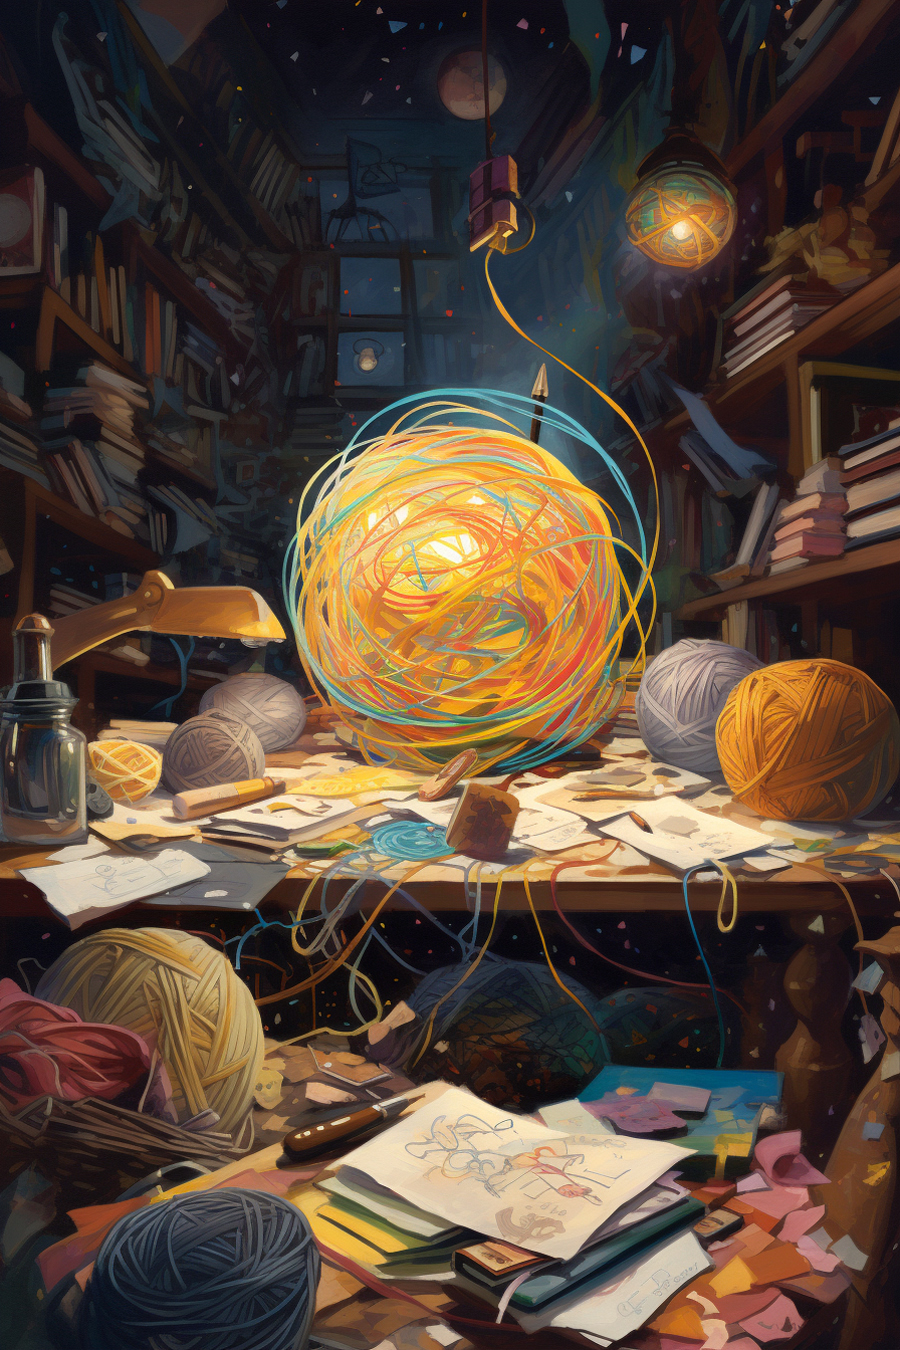 A painting of a yarn ball on a table.